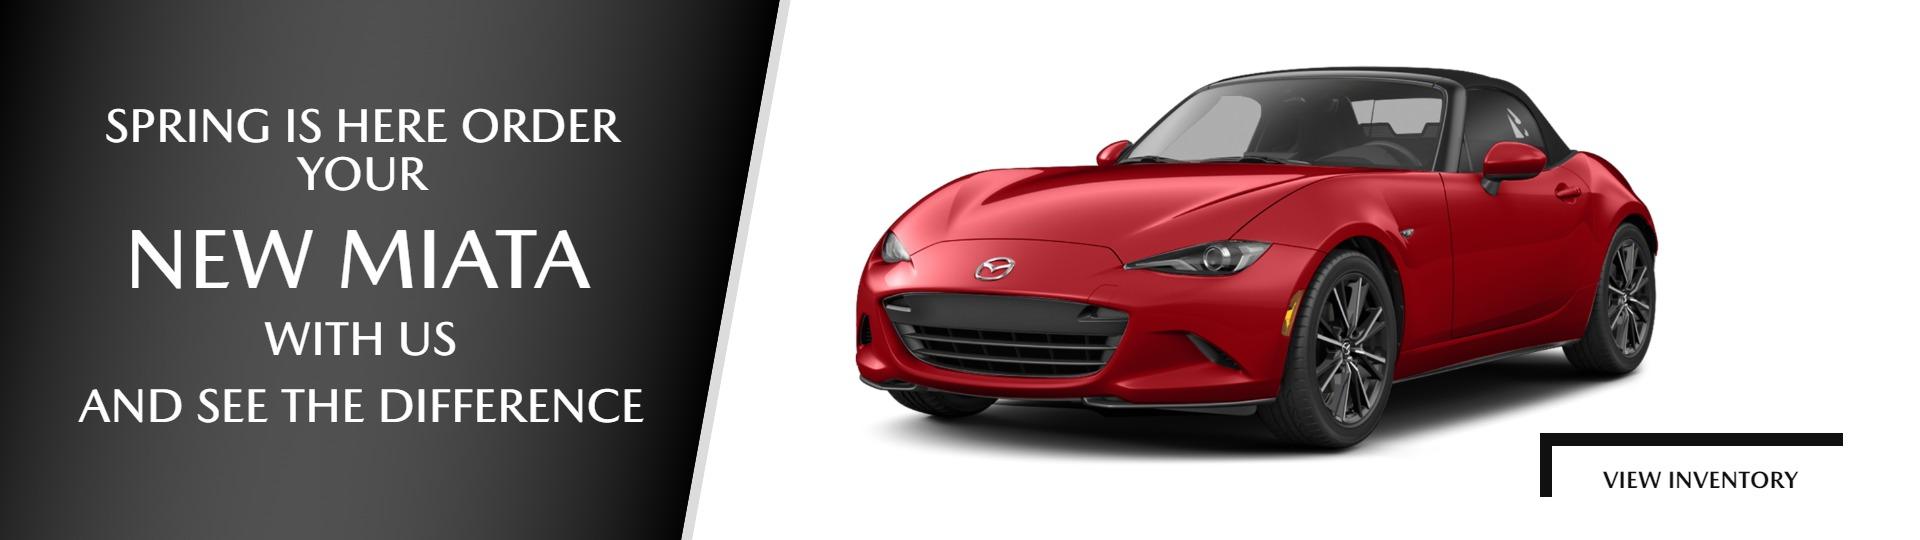 SPRING IS HERE ORDER YOUR NEW MIATA WITH US AND SEE THE DIFFERENCE